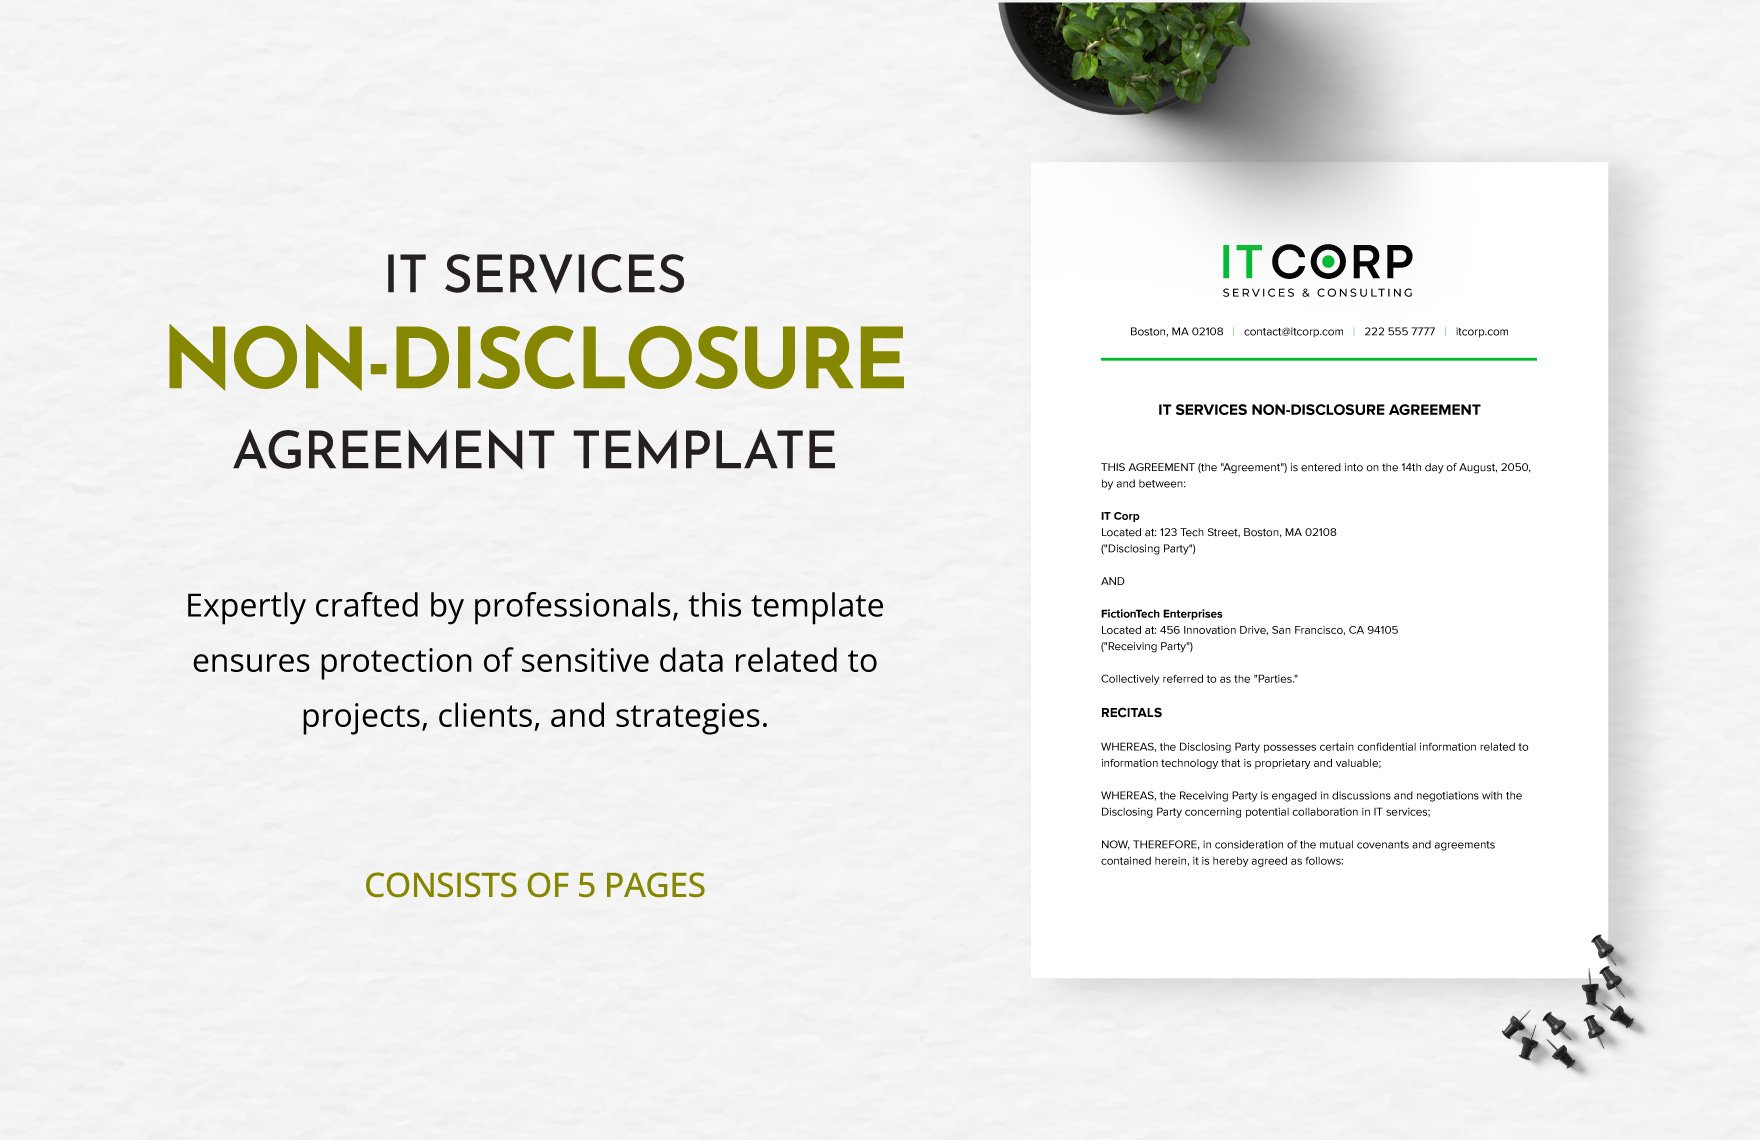 IT Services Non-Disclosure Agreement Template